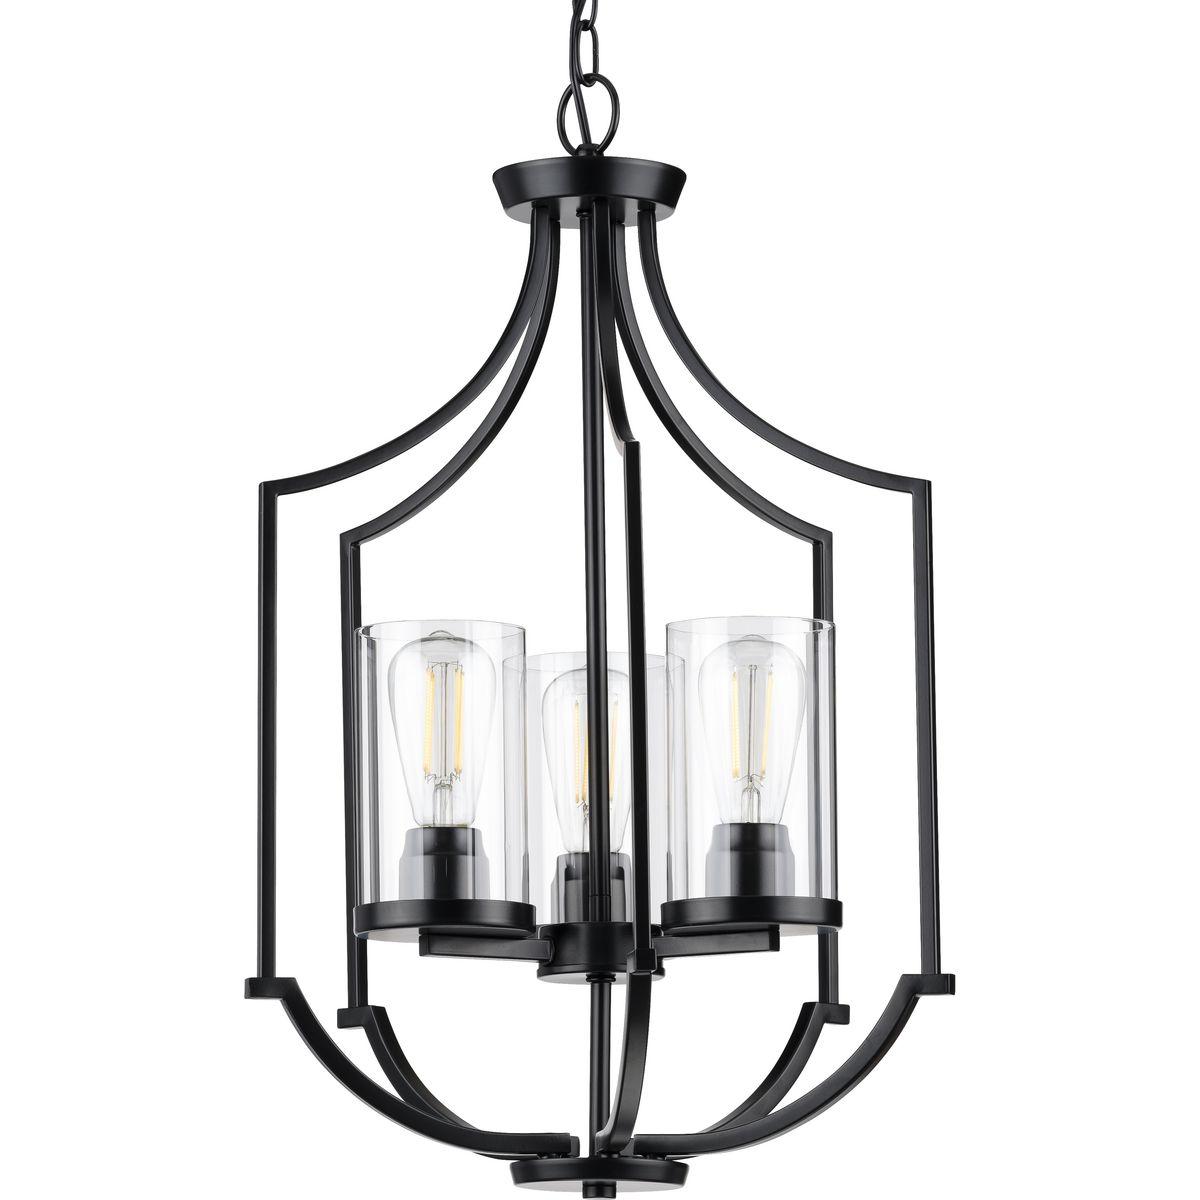 Hubbell P500209-031 Manifest a swoon-worthy lighting experience with the stunning blend of the modern and traditional styles in this one-of-a-kind Lassiter Collection Three-Light Matte Black Foyer. Square tubing with clean, sharp angles is coated in a beautiful matte black f